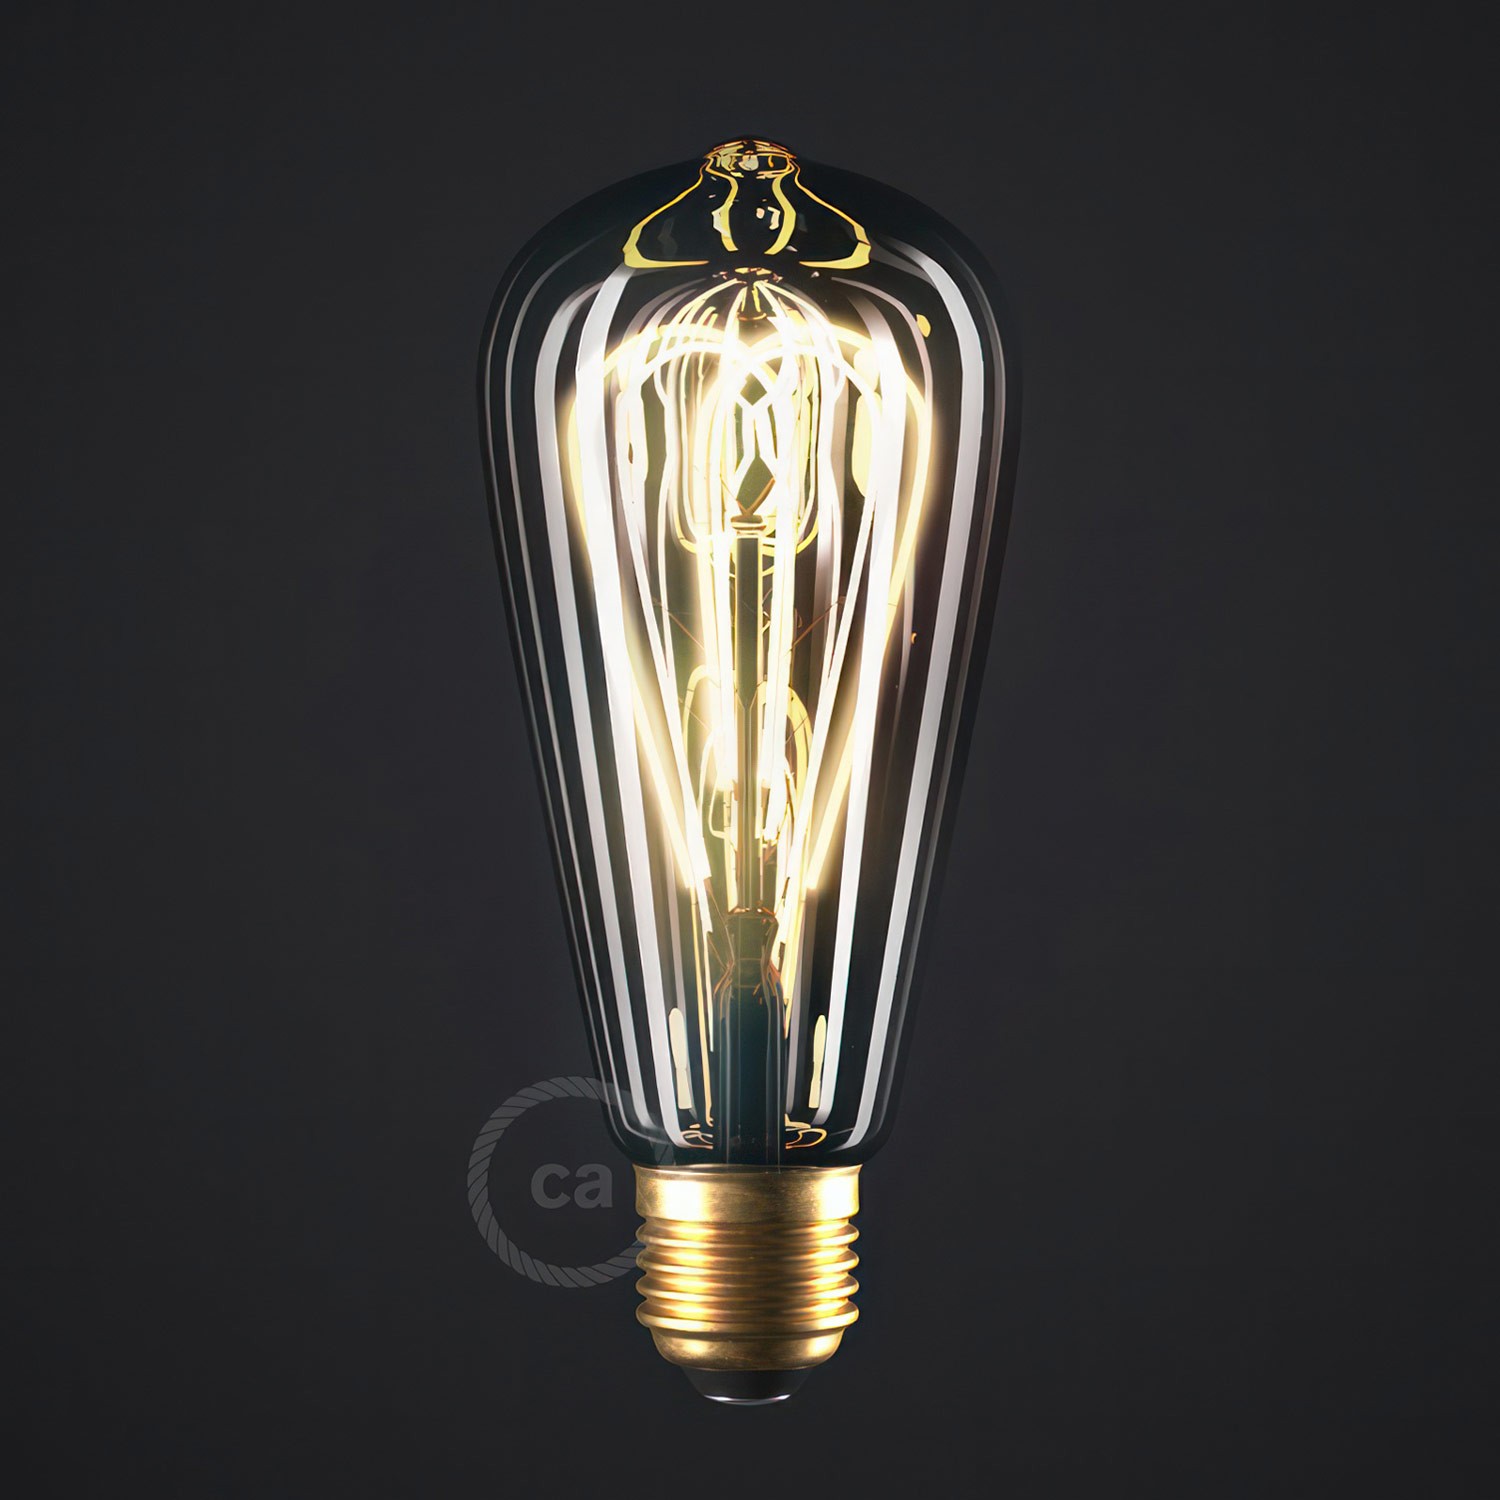 LED Smoky Light Bulb - Edison ST64 Curved Double Loop Filament - 5W 150Lm E27 2000K Dimmable